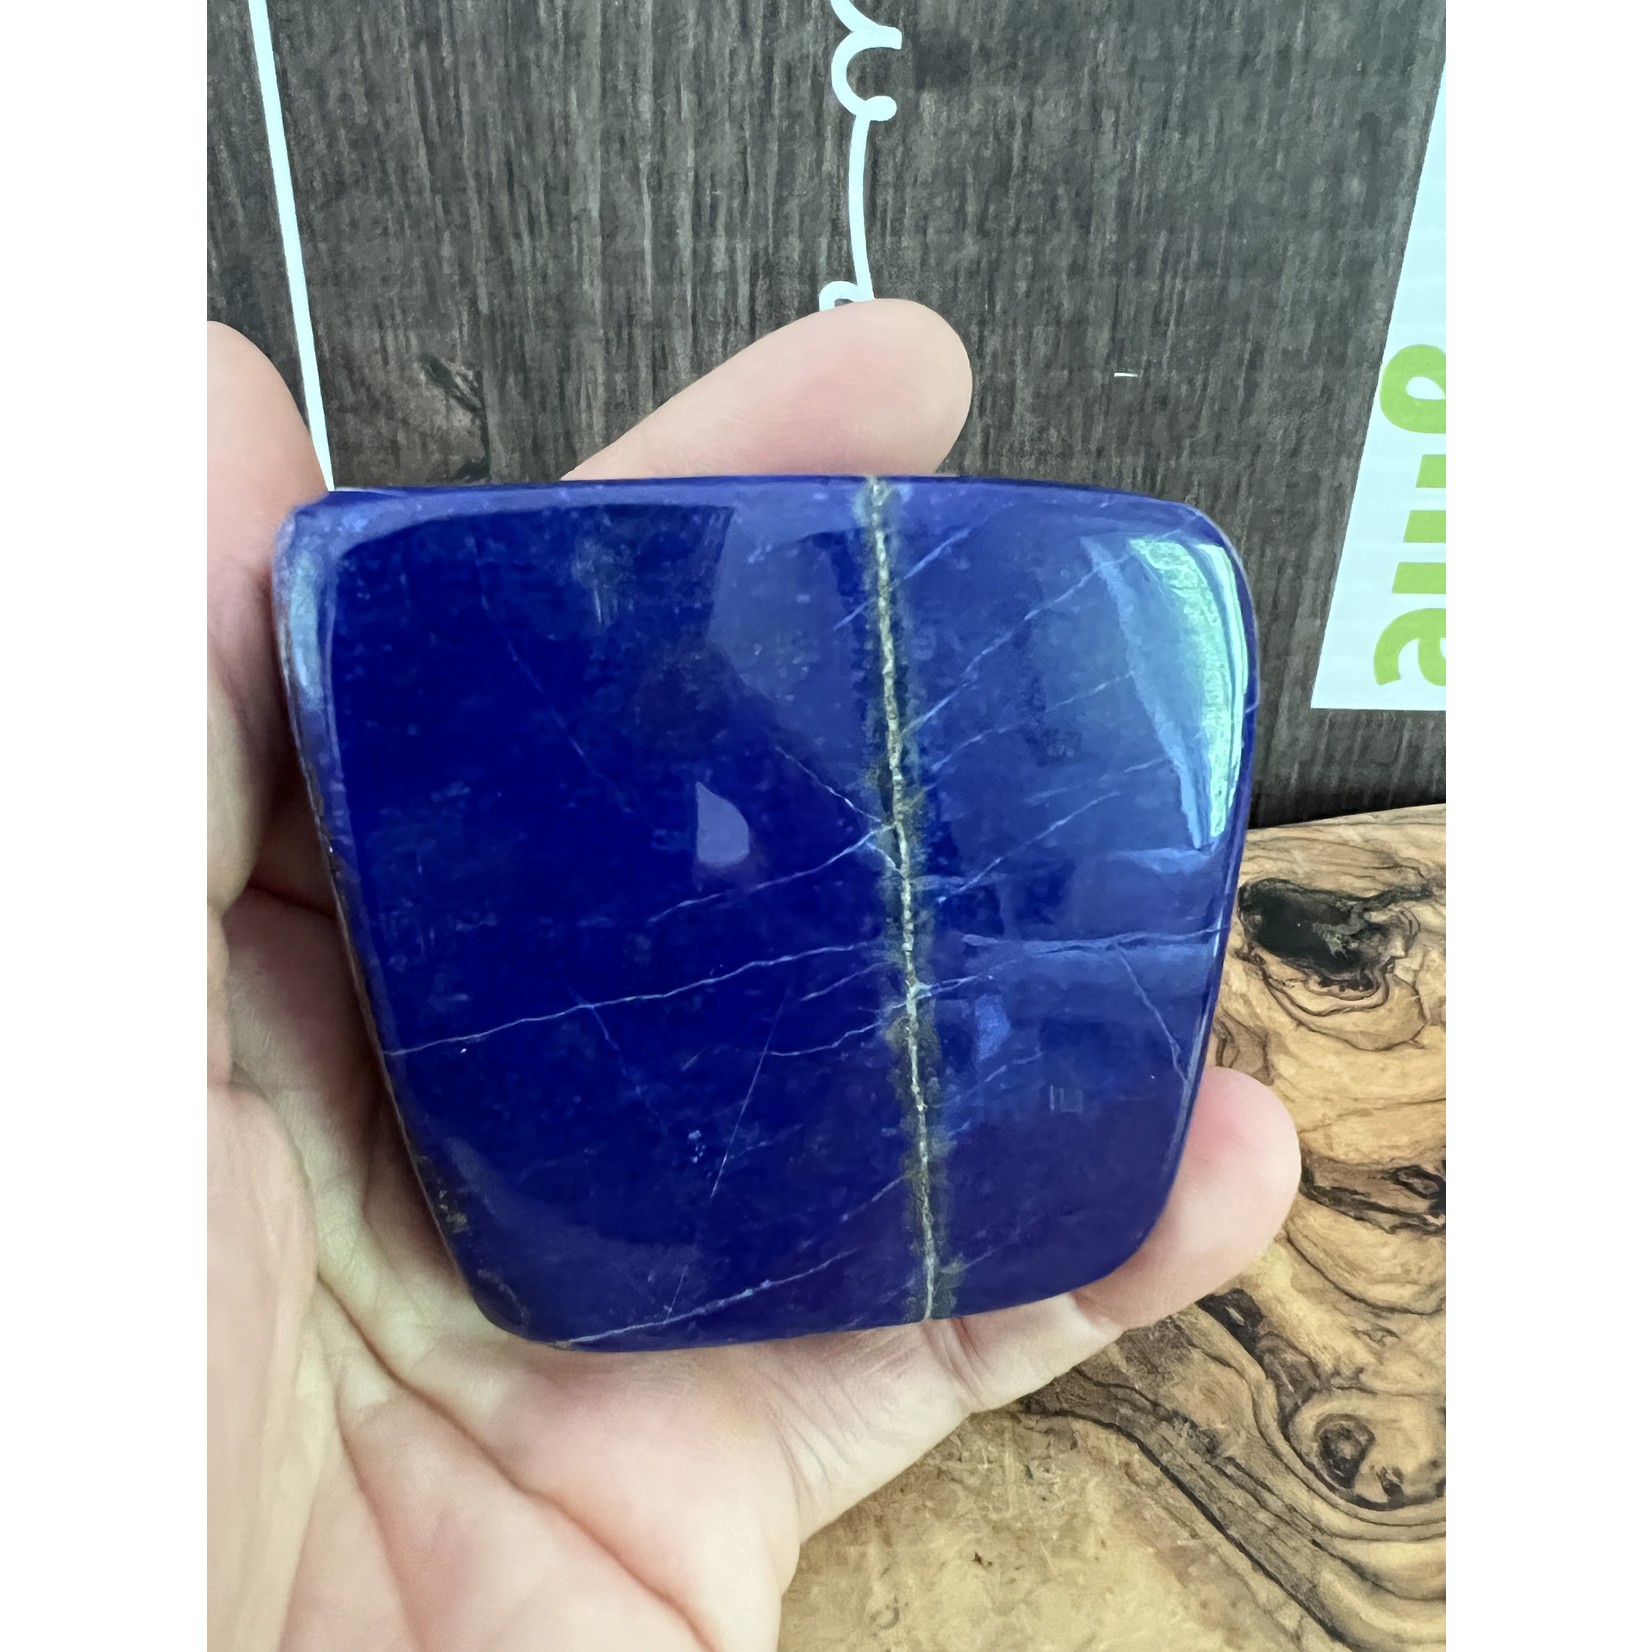 charming piece of lapis lazuli freeform, beneficial for the respiratory system, cleansing organs and the nervous system